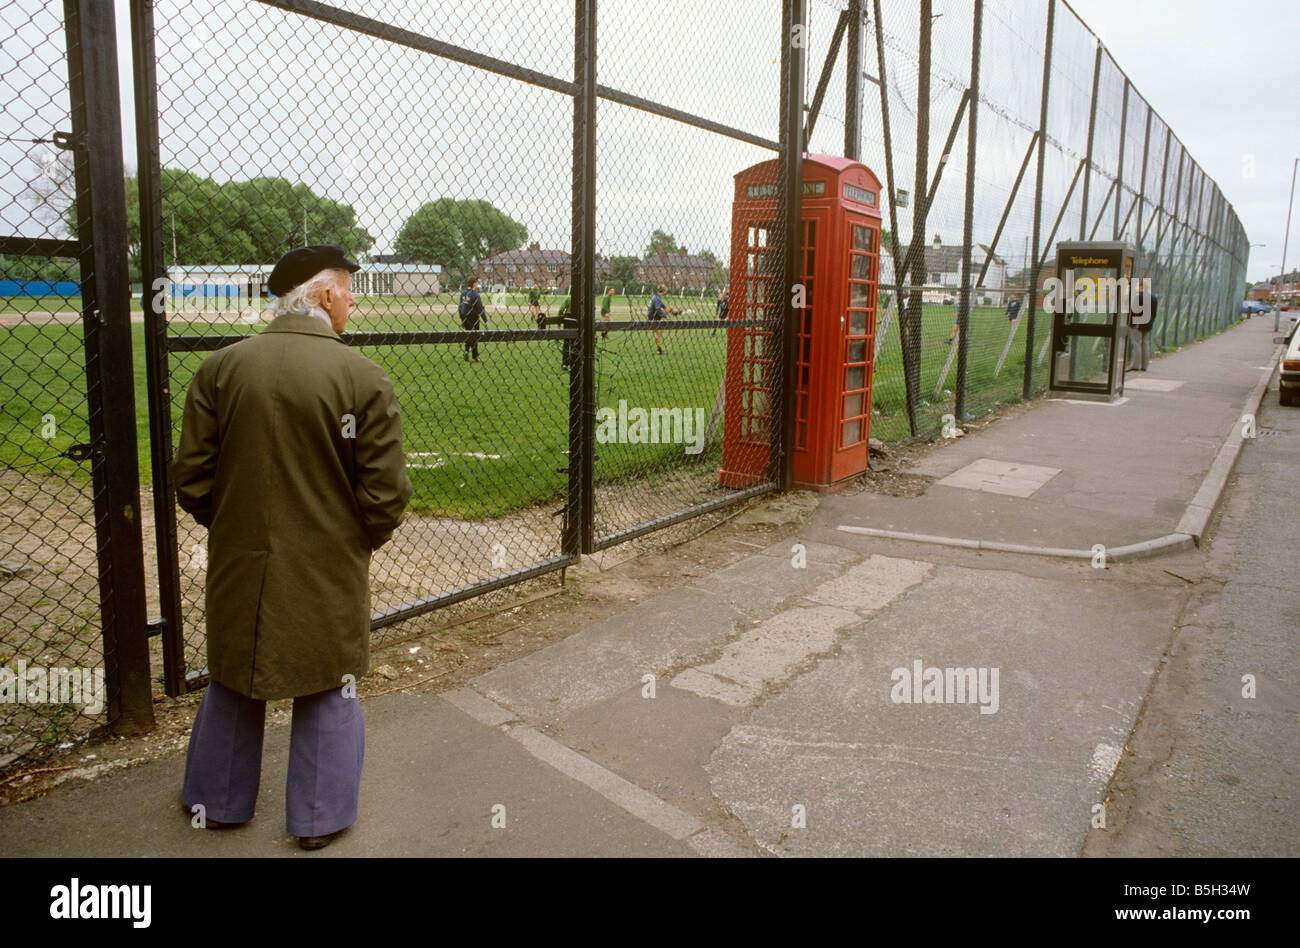 UK England Manchester Rusholme K6 and new KX100 Phone boxes in Manchester City football clubs Platt Lane Training Ground fence Stock Photo